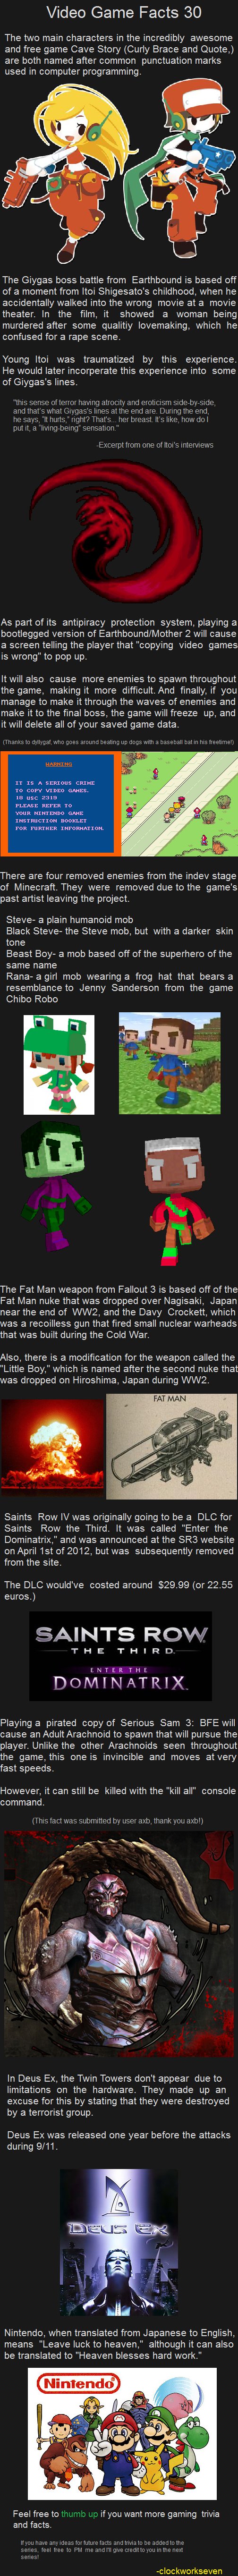 Video Game Facts #30